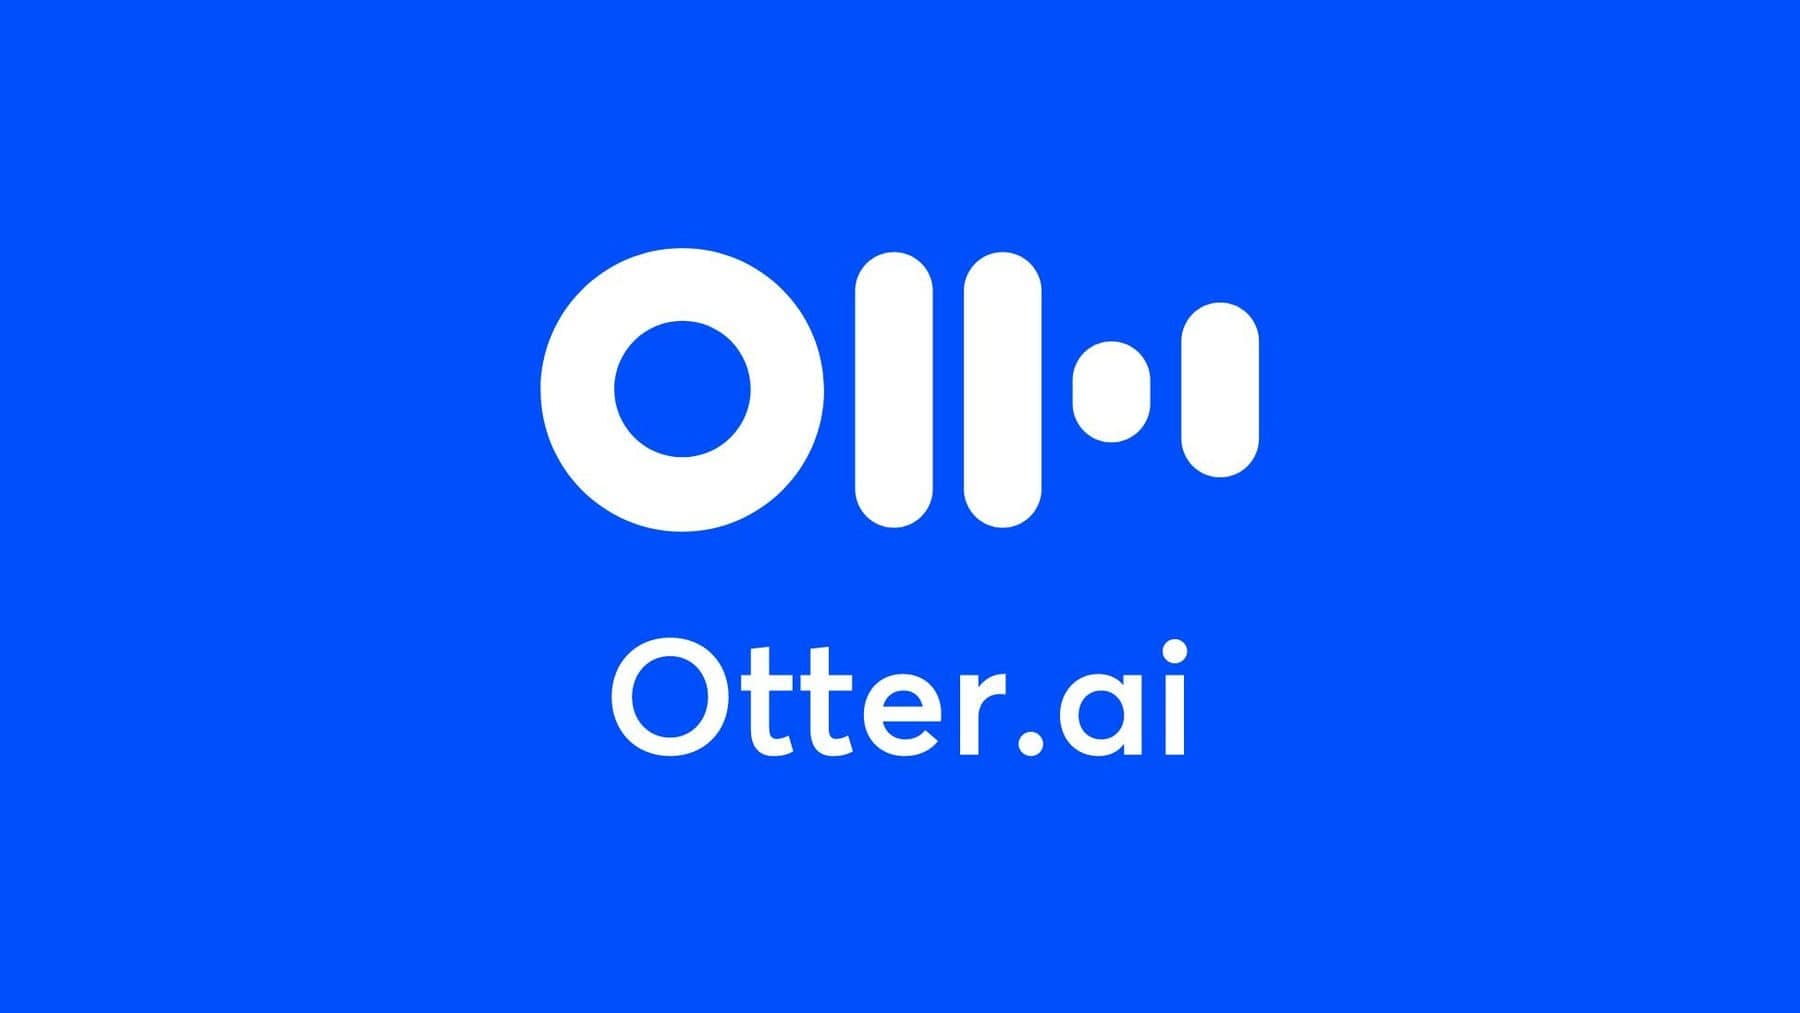 otter.ai tools for education